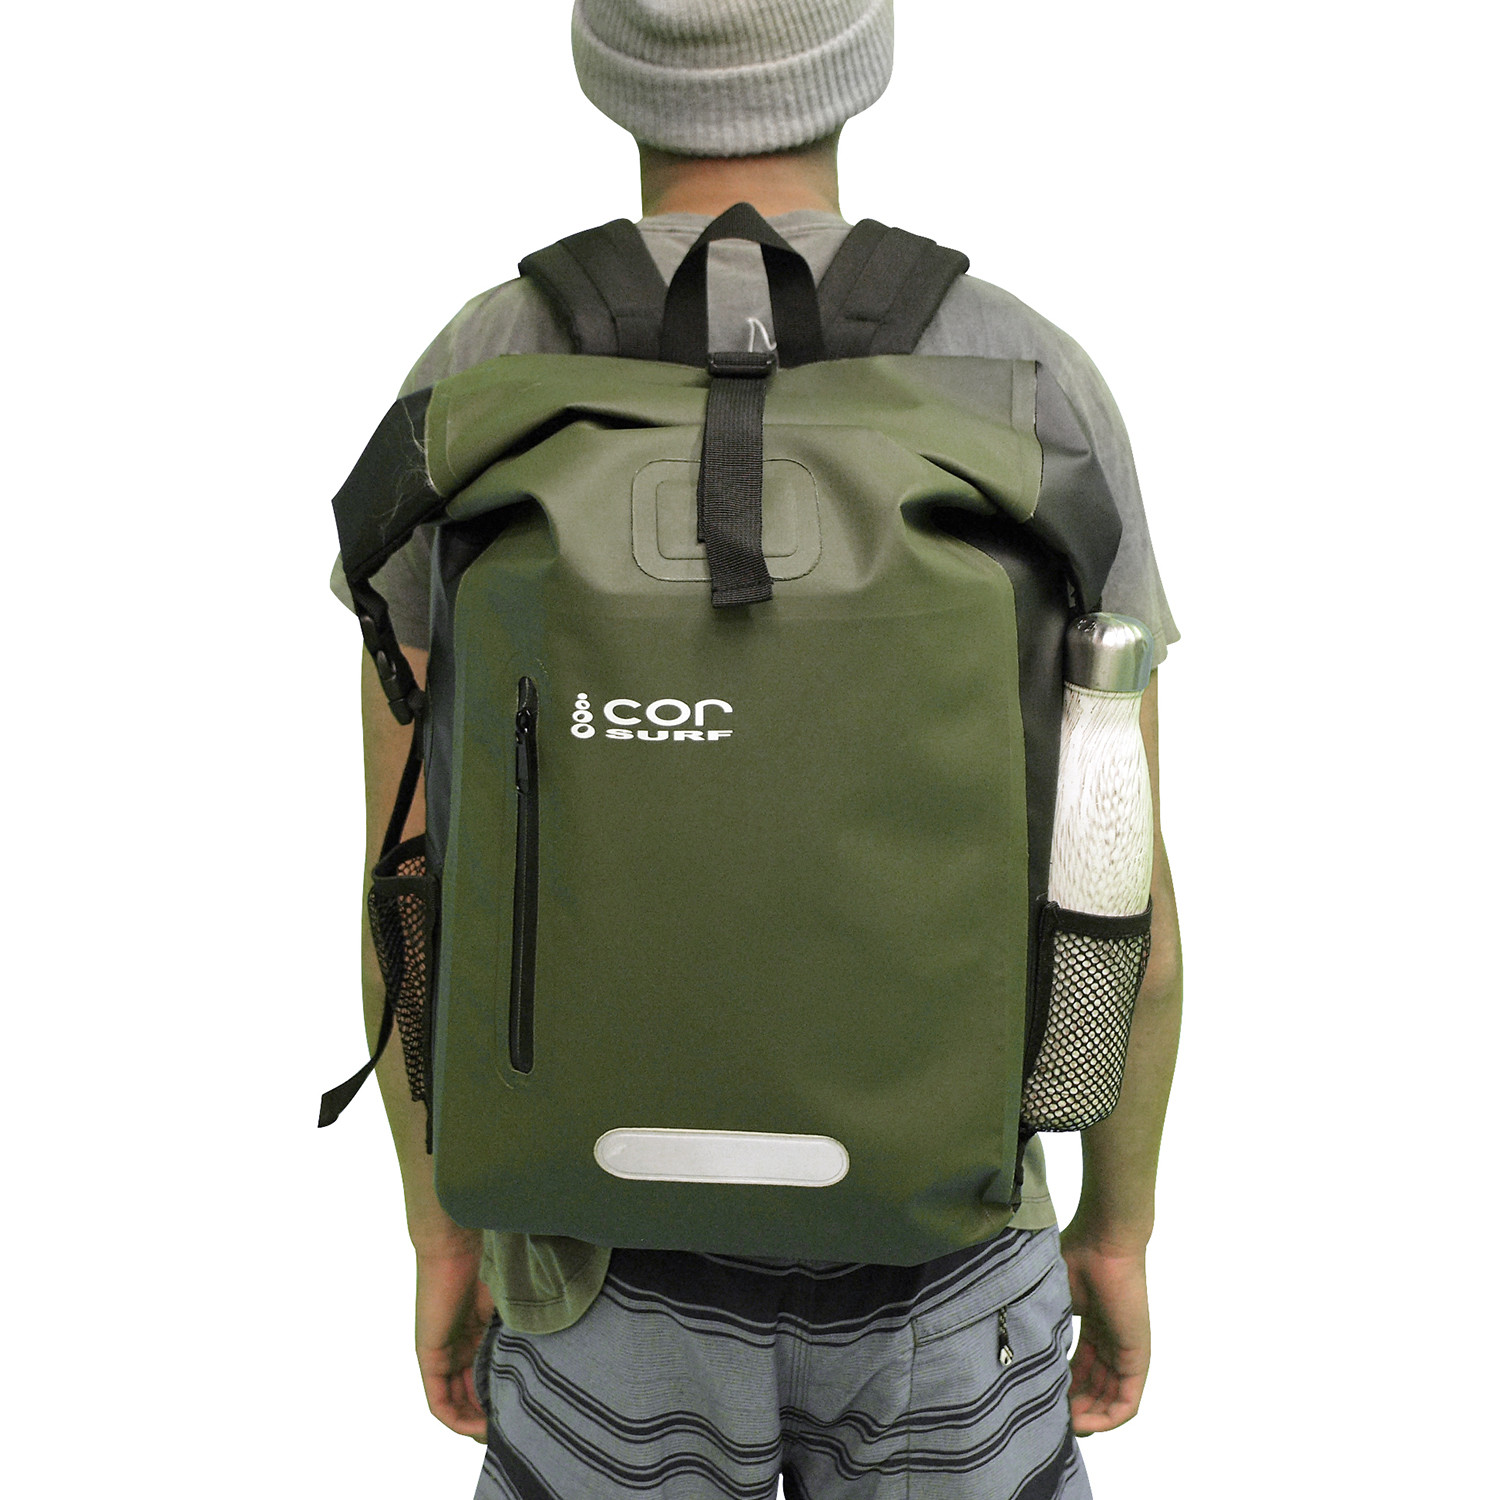 Waterproof Dry Backpack // 40L // Green - COR Surf - Touch of Modern